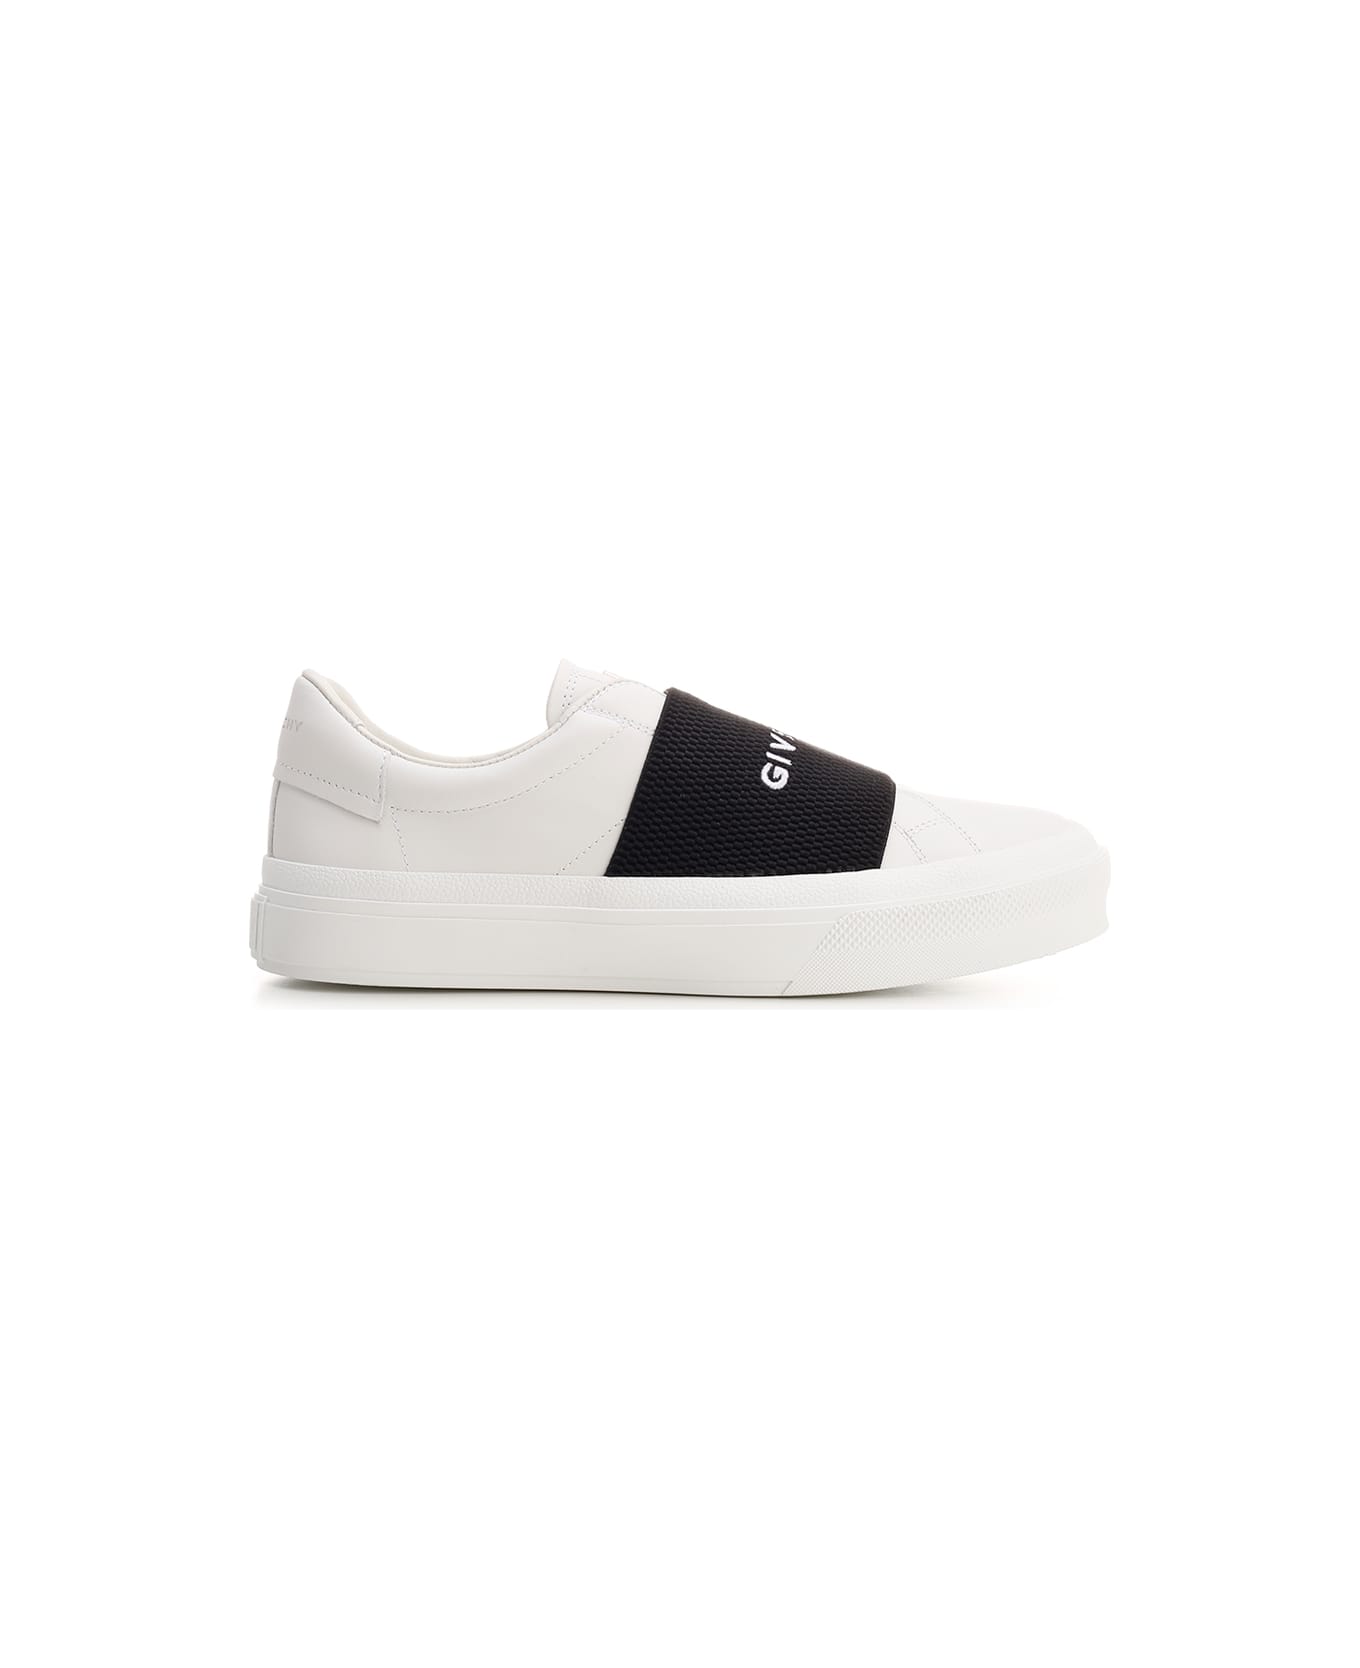 Givenchy White 'city Court' Sneakers - White